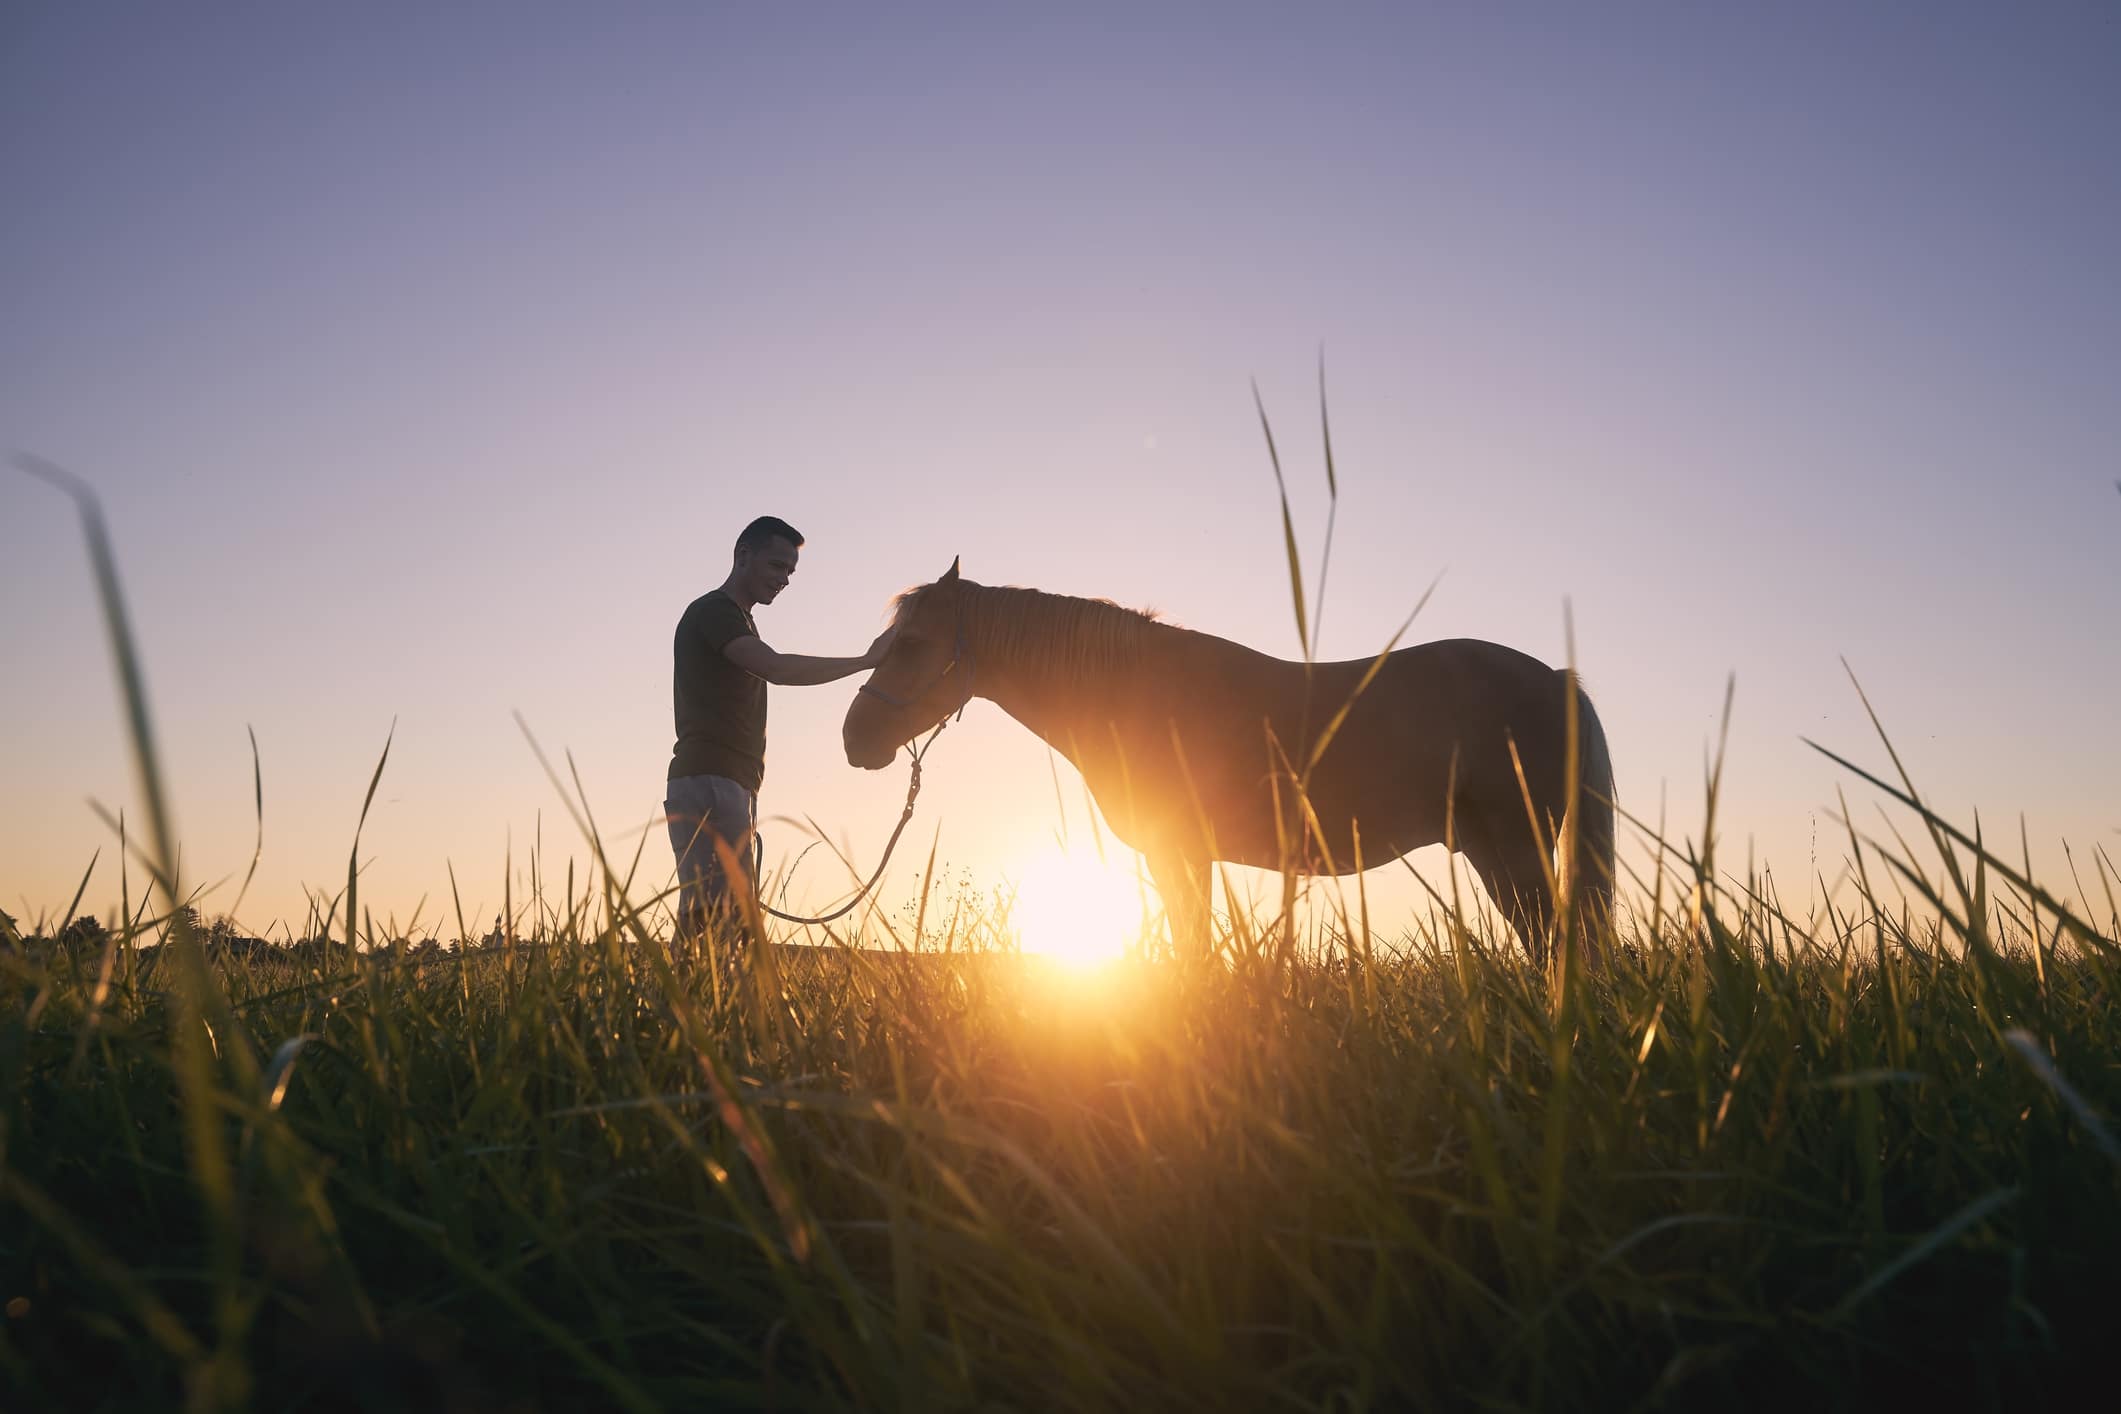 A man and a horse in a field at sunset, with the sun's glow creating silhouettes